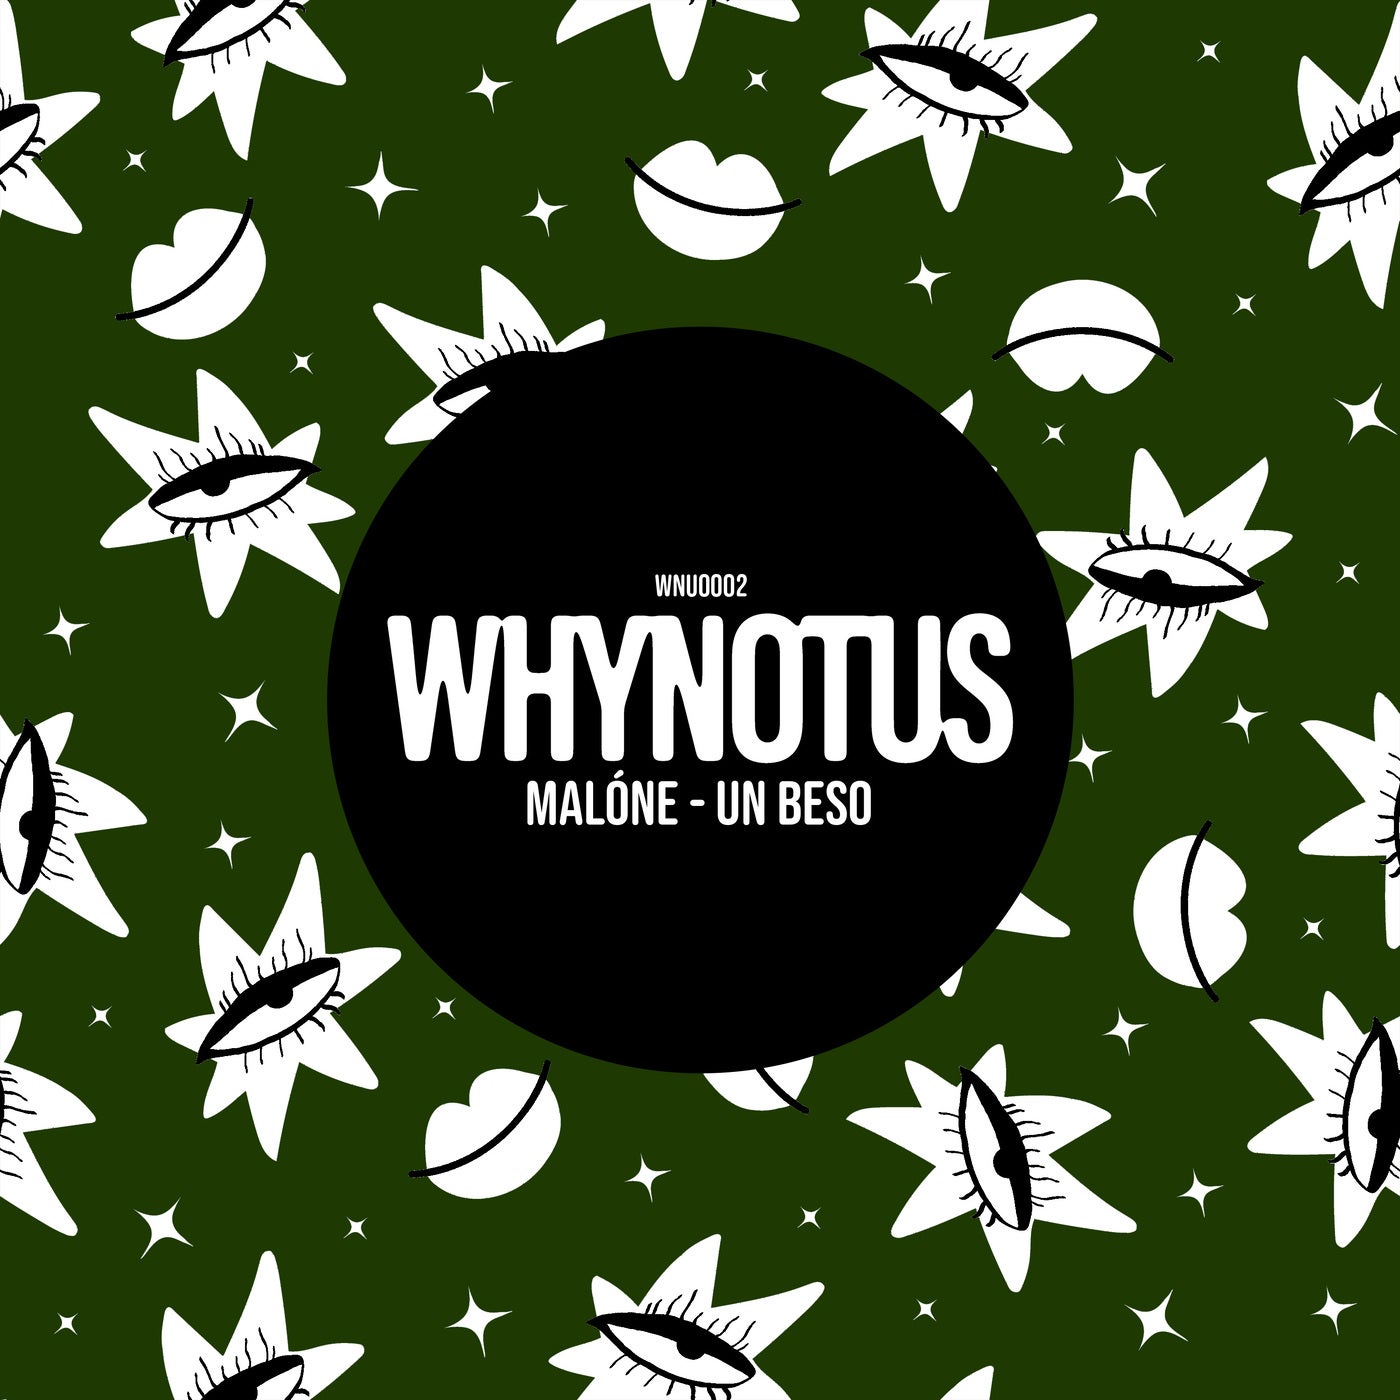 image cover: Malone - Un Beso on WHYNOTUS